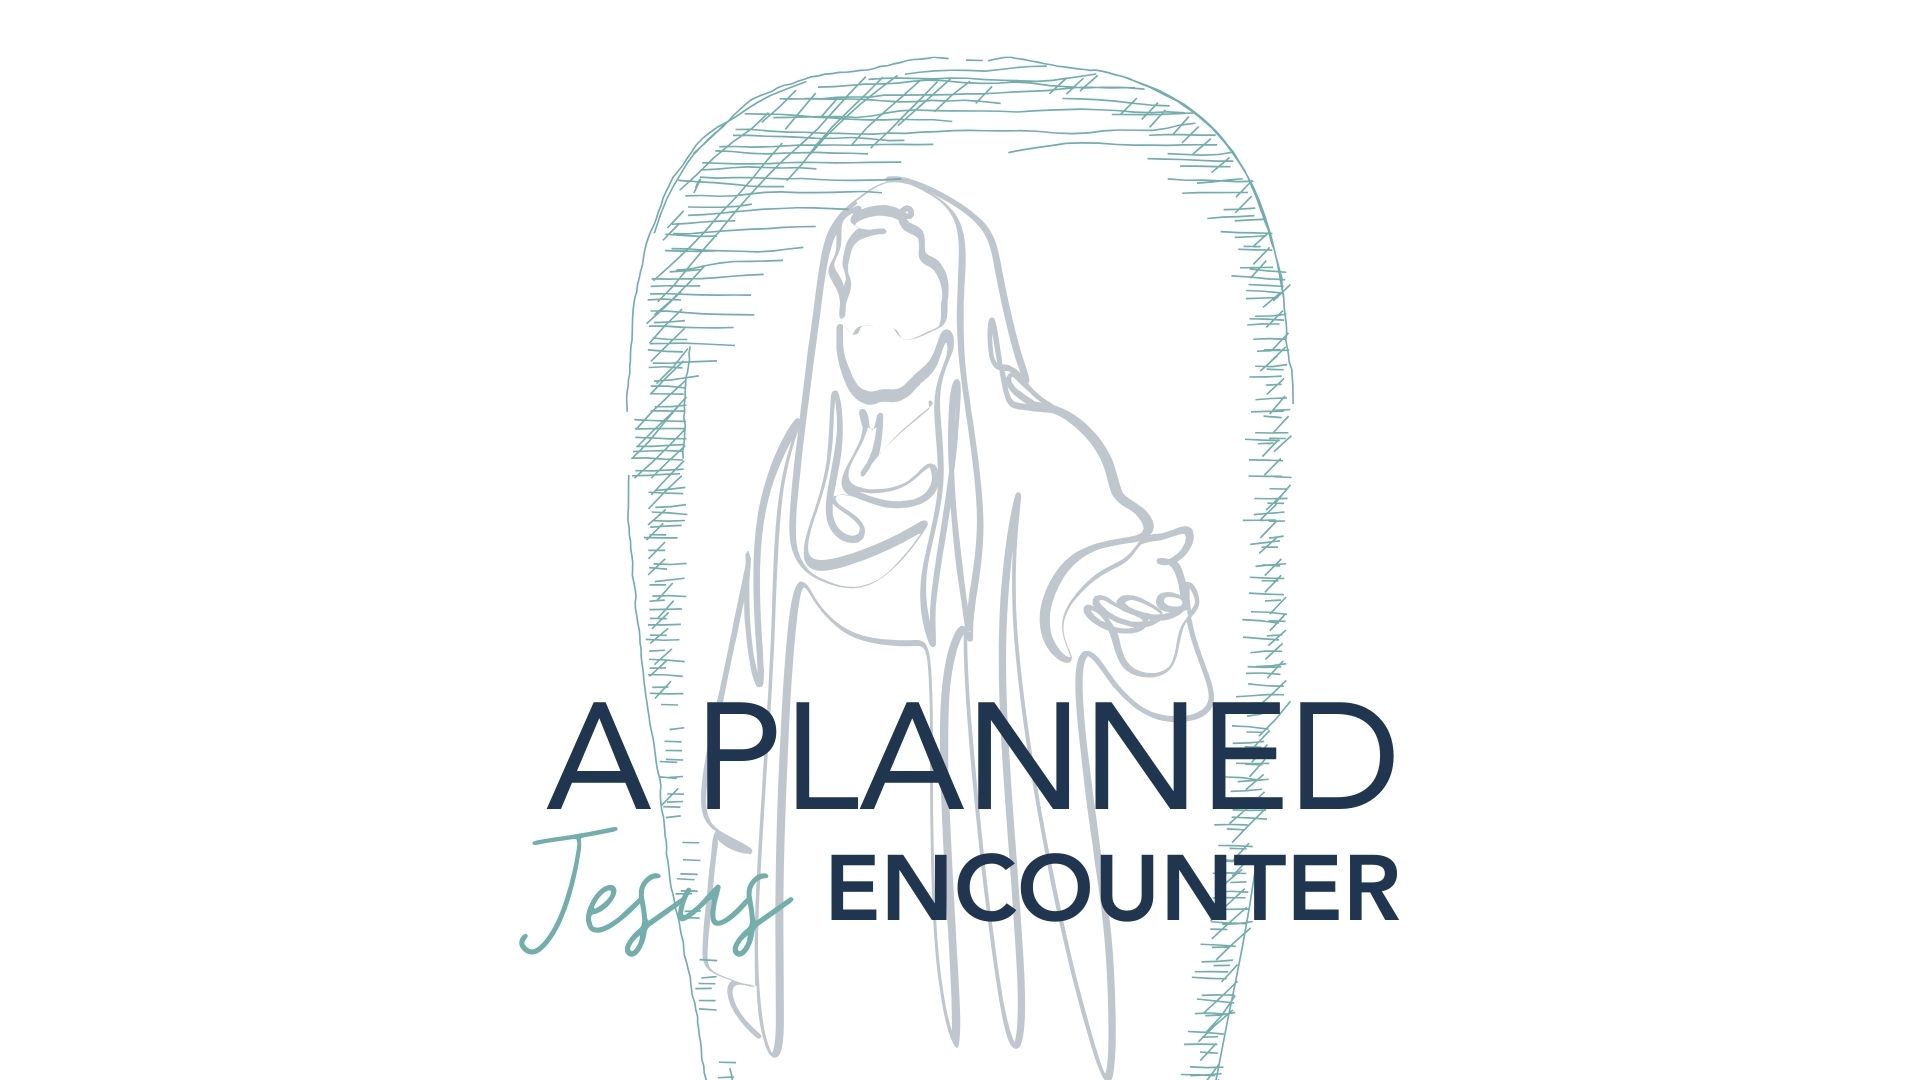 A Planned Jesus Encounter with Pastor Tanner